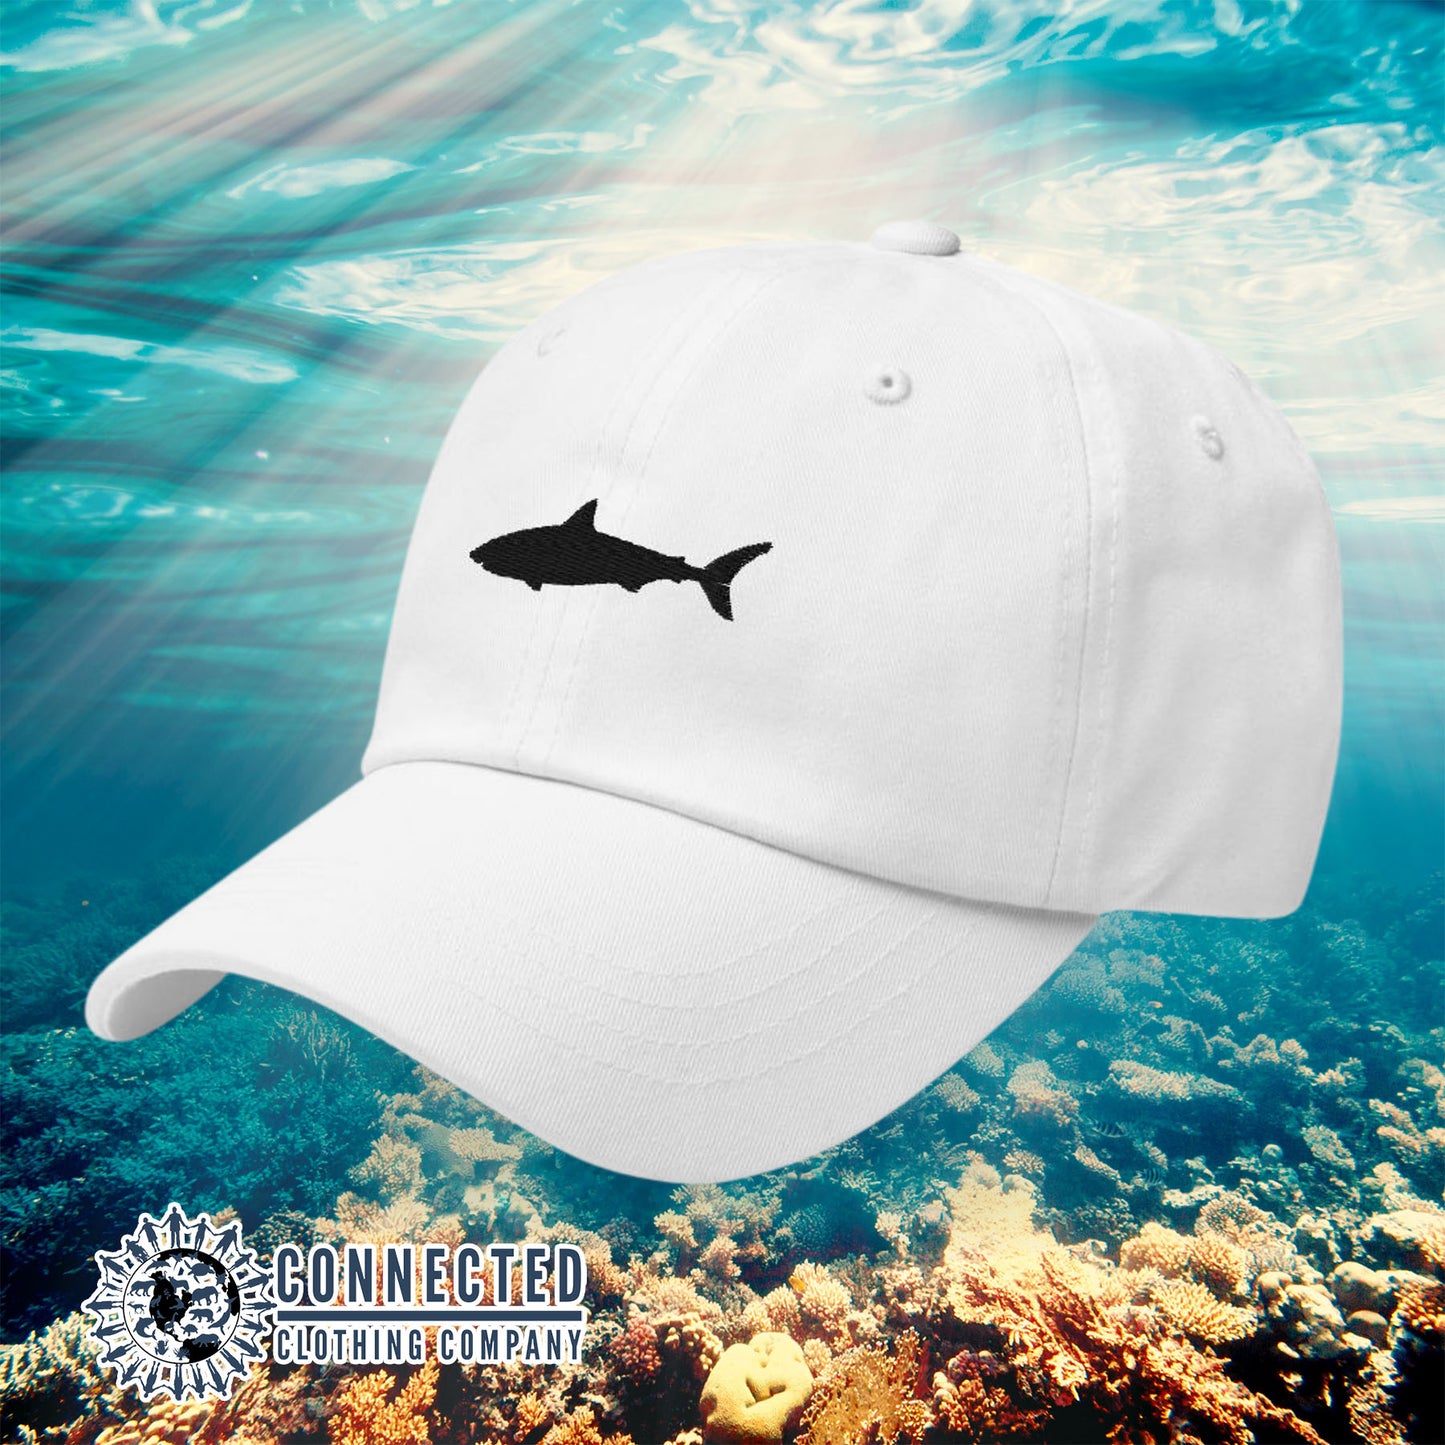 White Shark Cotton Cap - sweetsherriloudesigns - Ethical & Sustainable Clothing That Gives Back - 10% donated to Oceana shark conservation